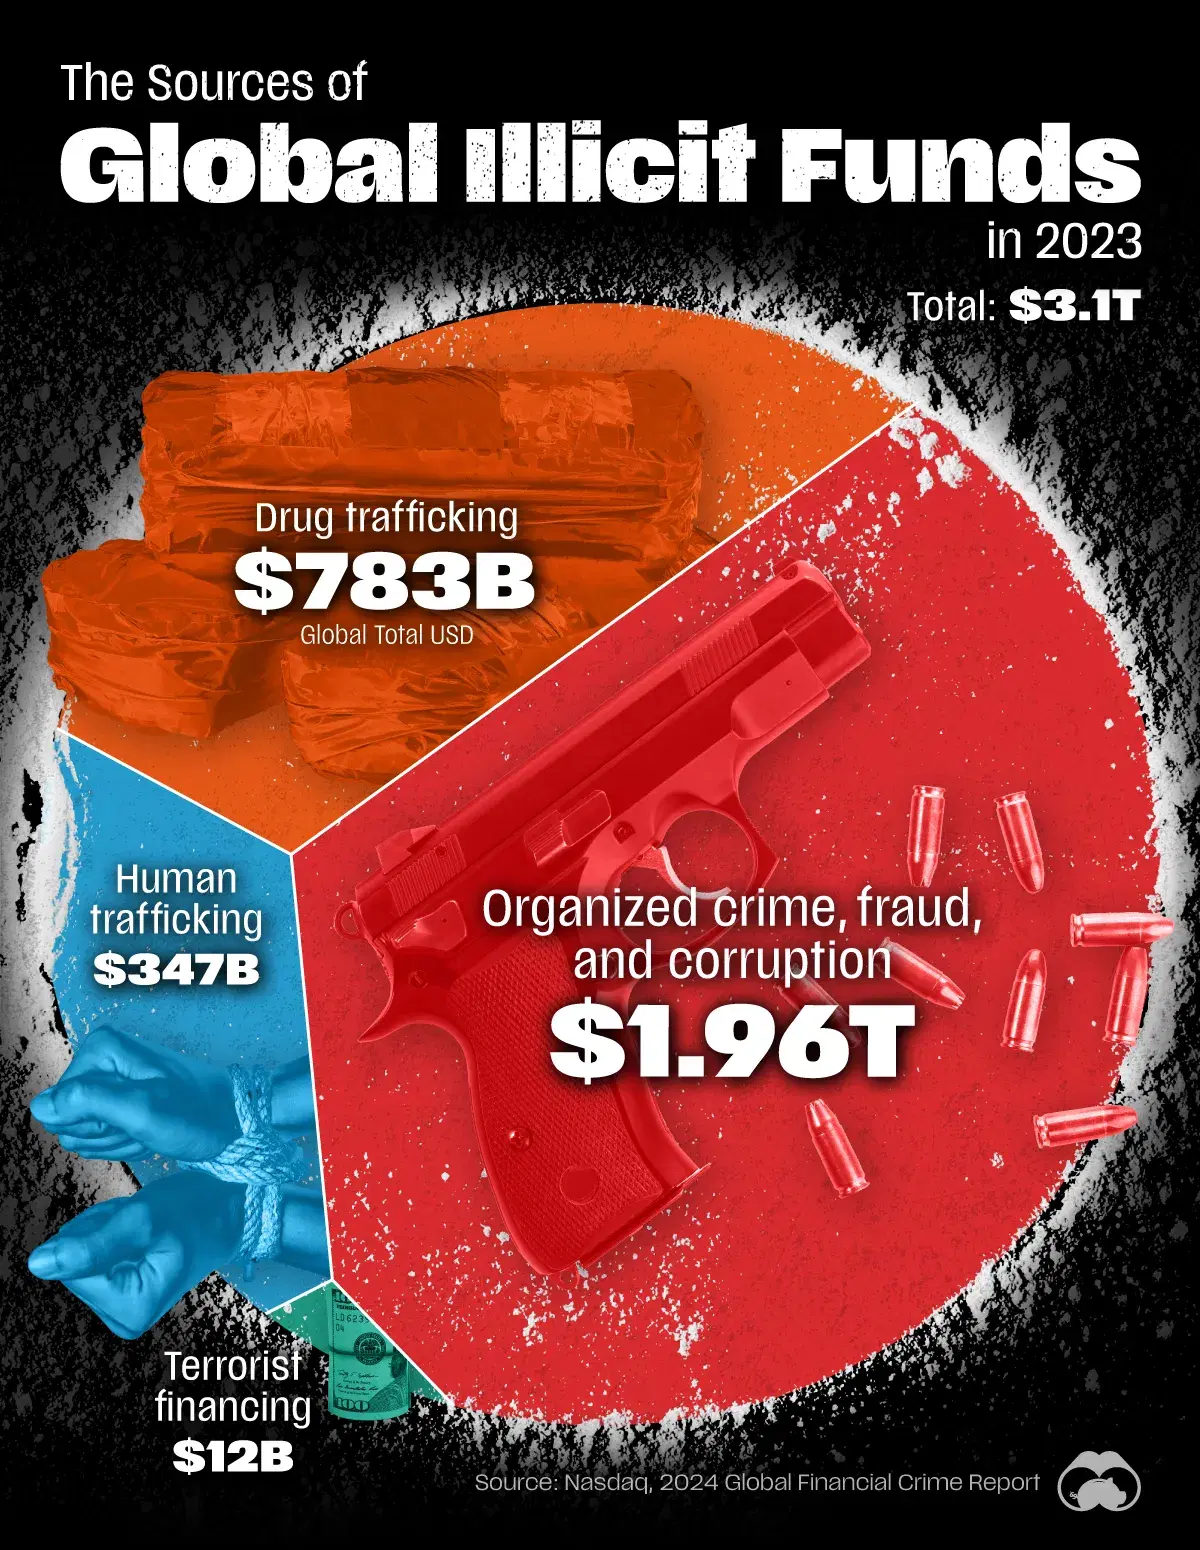 The Sources of Global Criminal Revenue in 2023